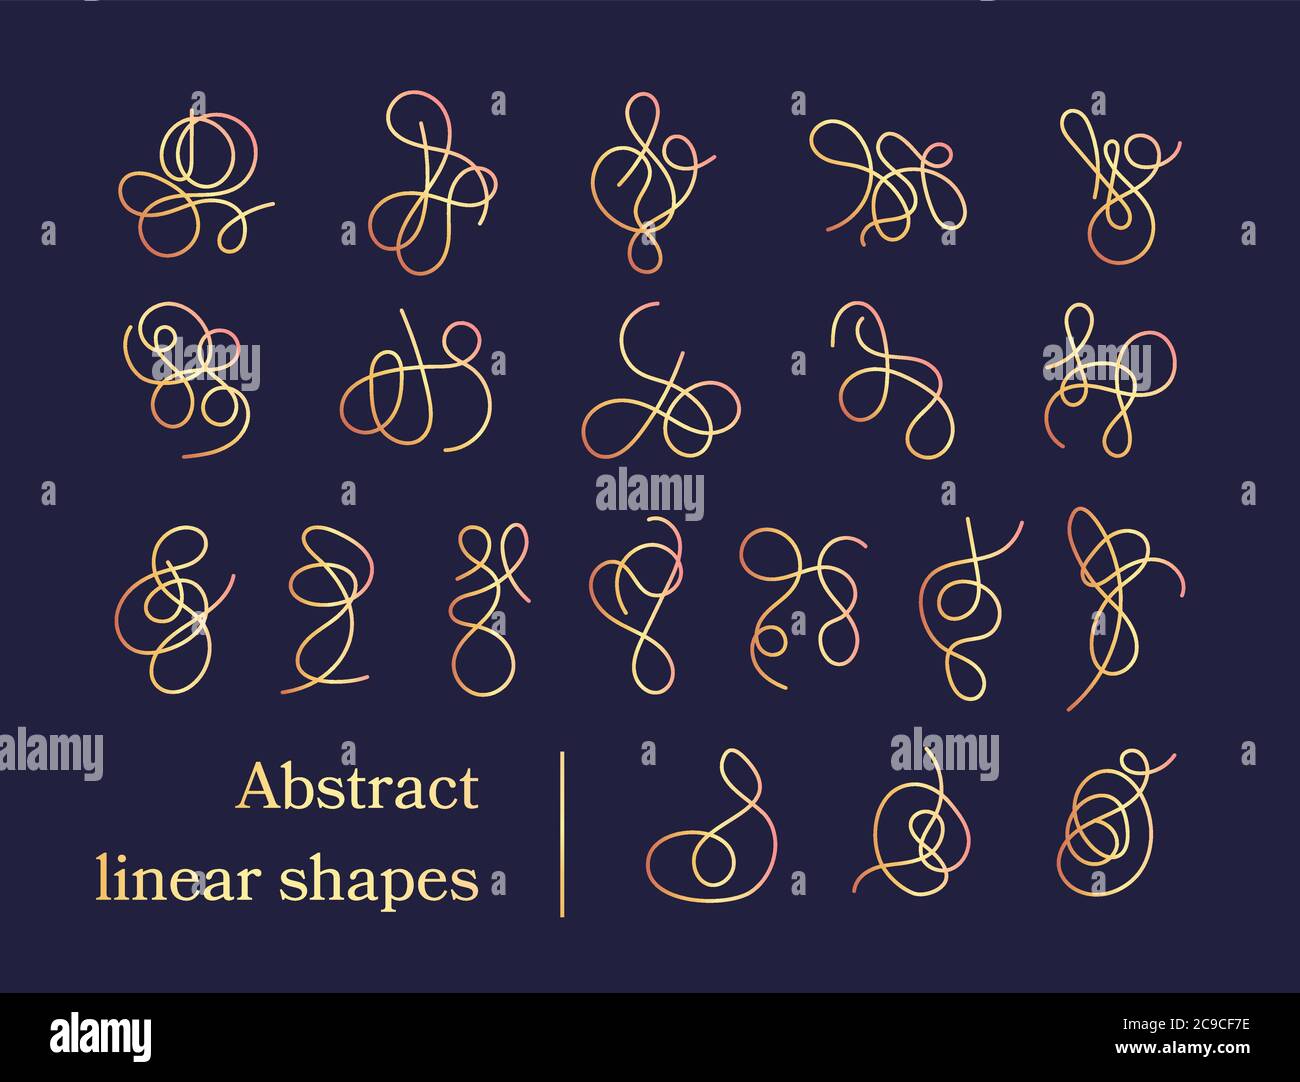 Set of modern abstract linear shapes drawing by hand. Isolated chaotic clews or scrawl tangles by one line Stock Vector